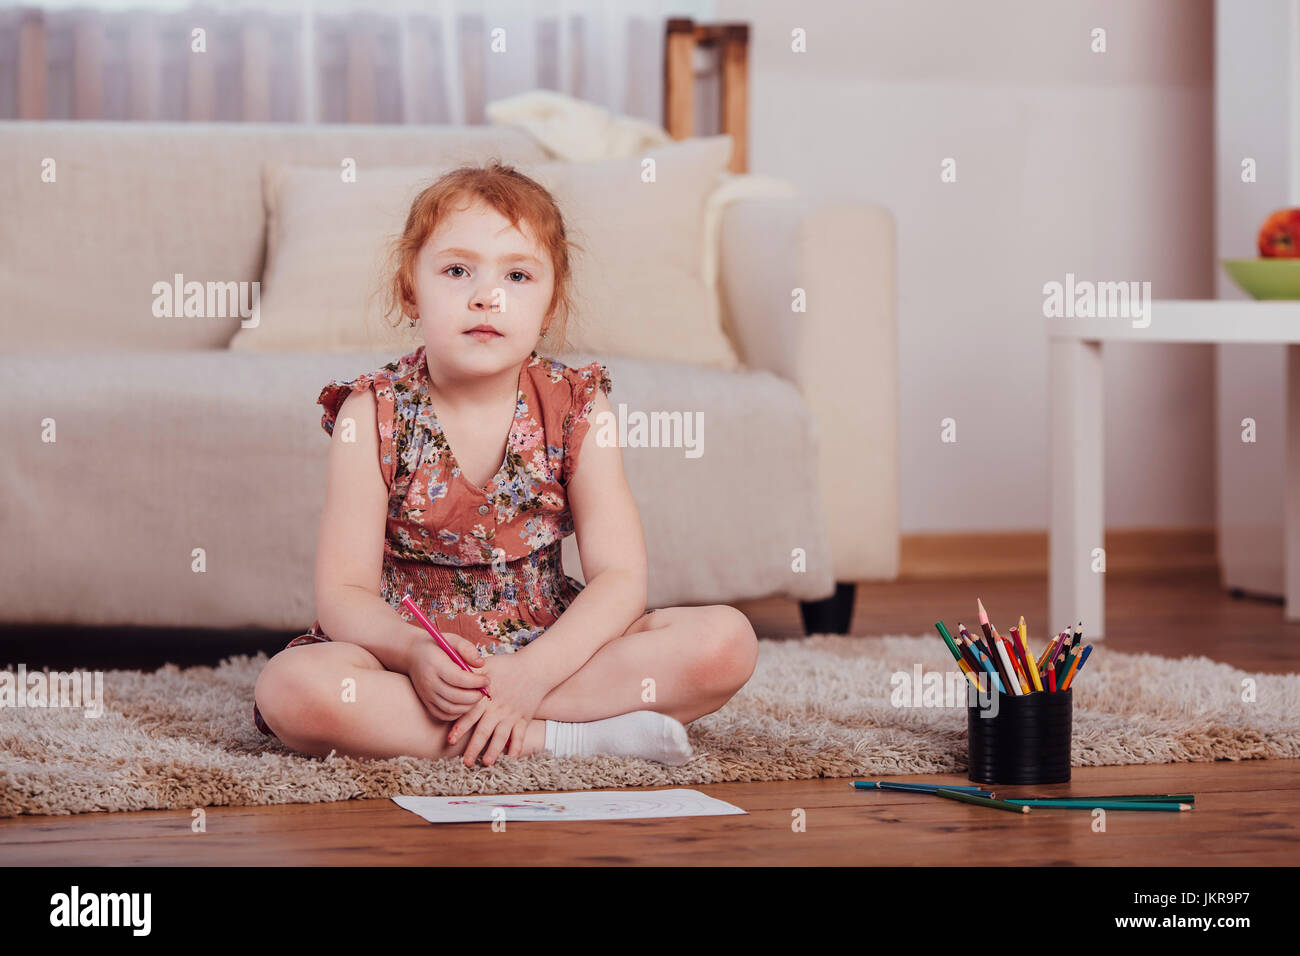 Portrait of smiling girl drawing while sitting on carpet in living room at home Stock Photo